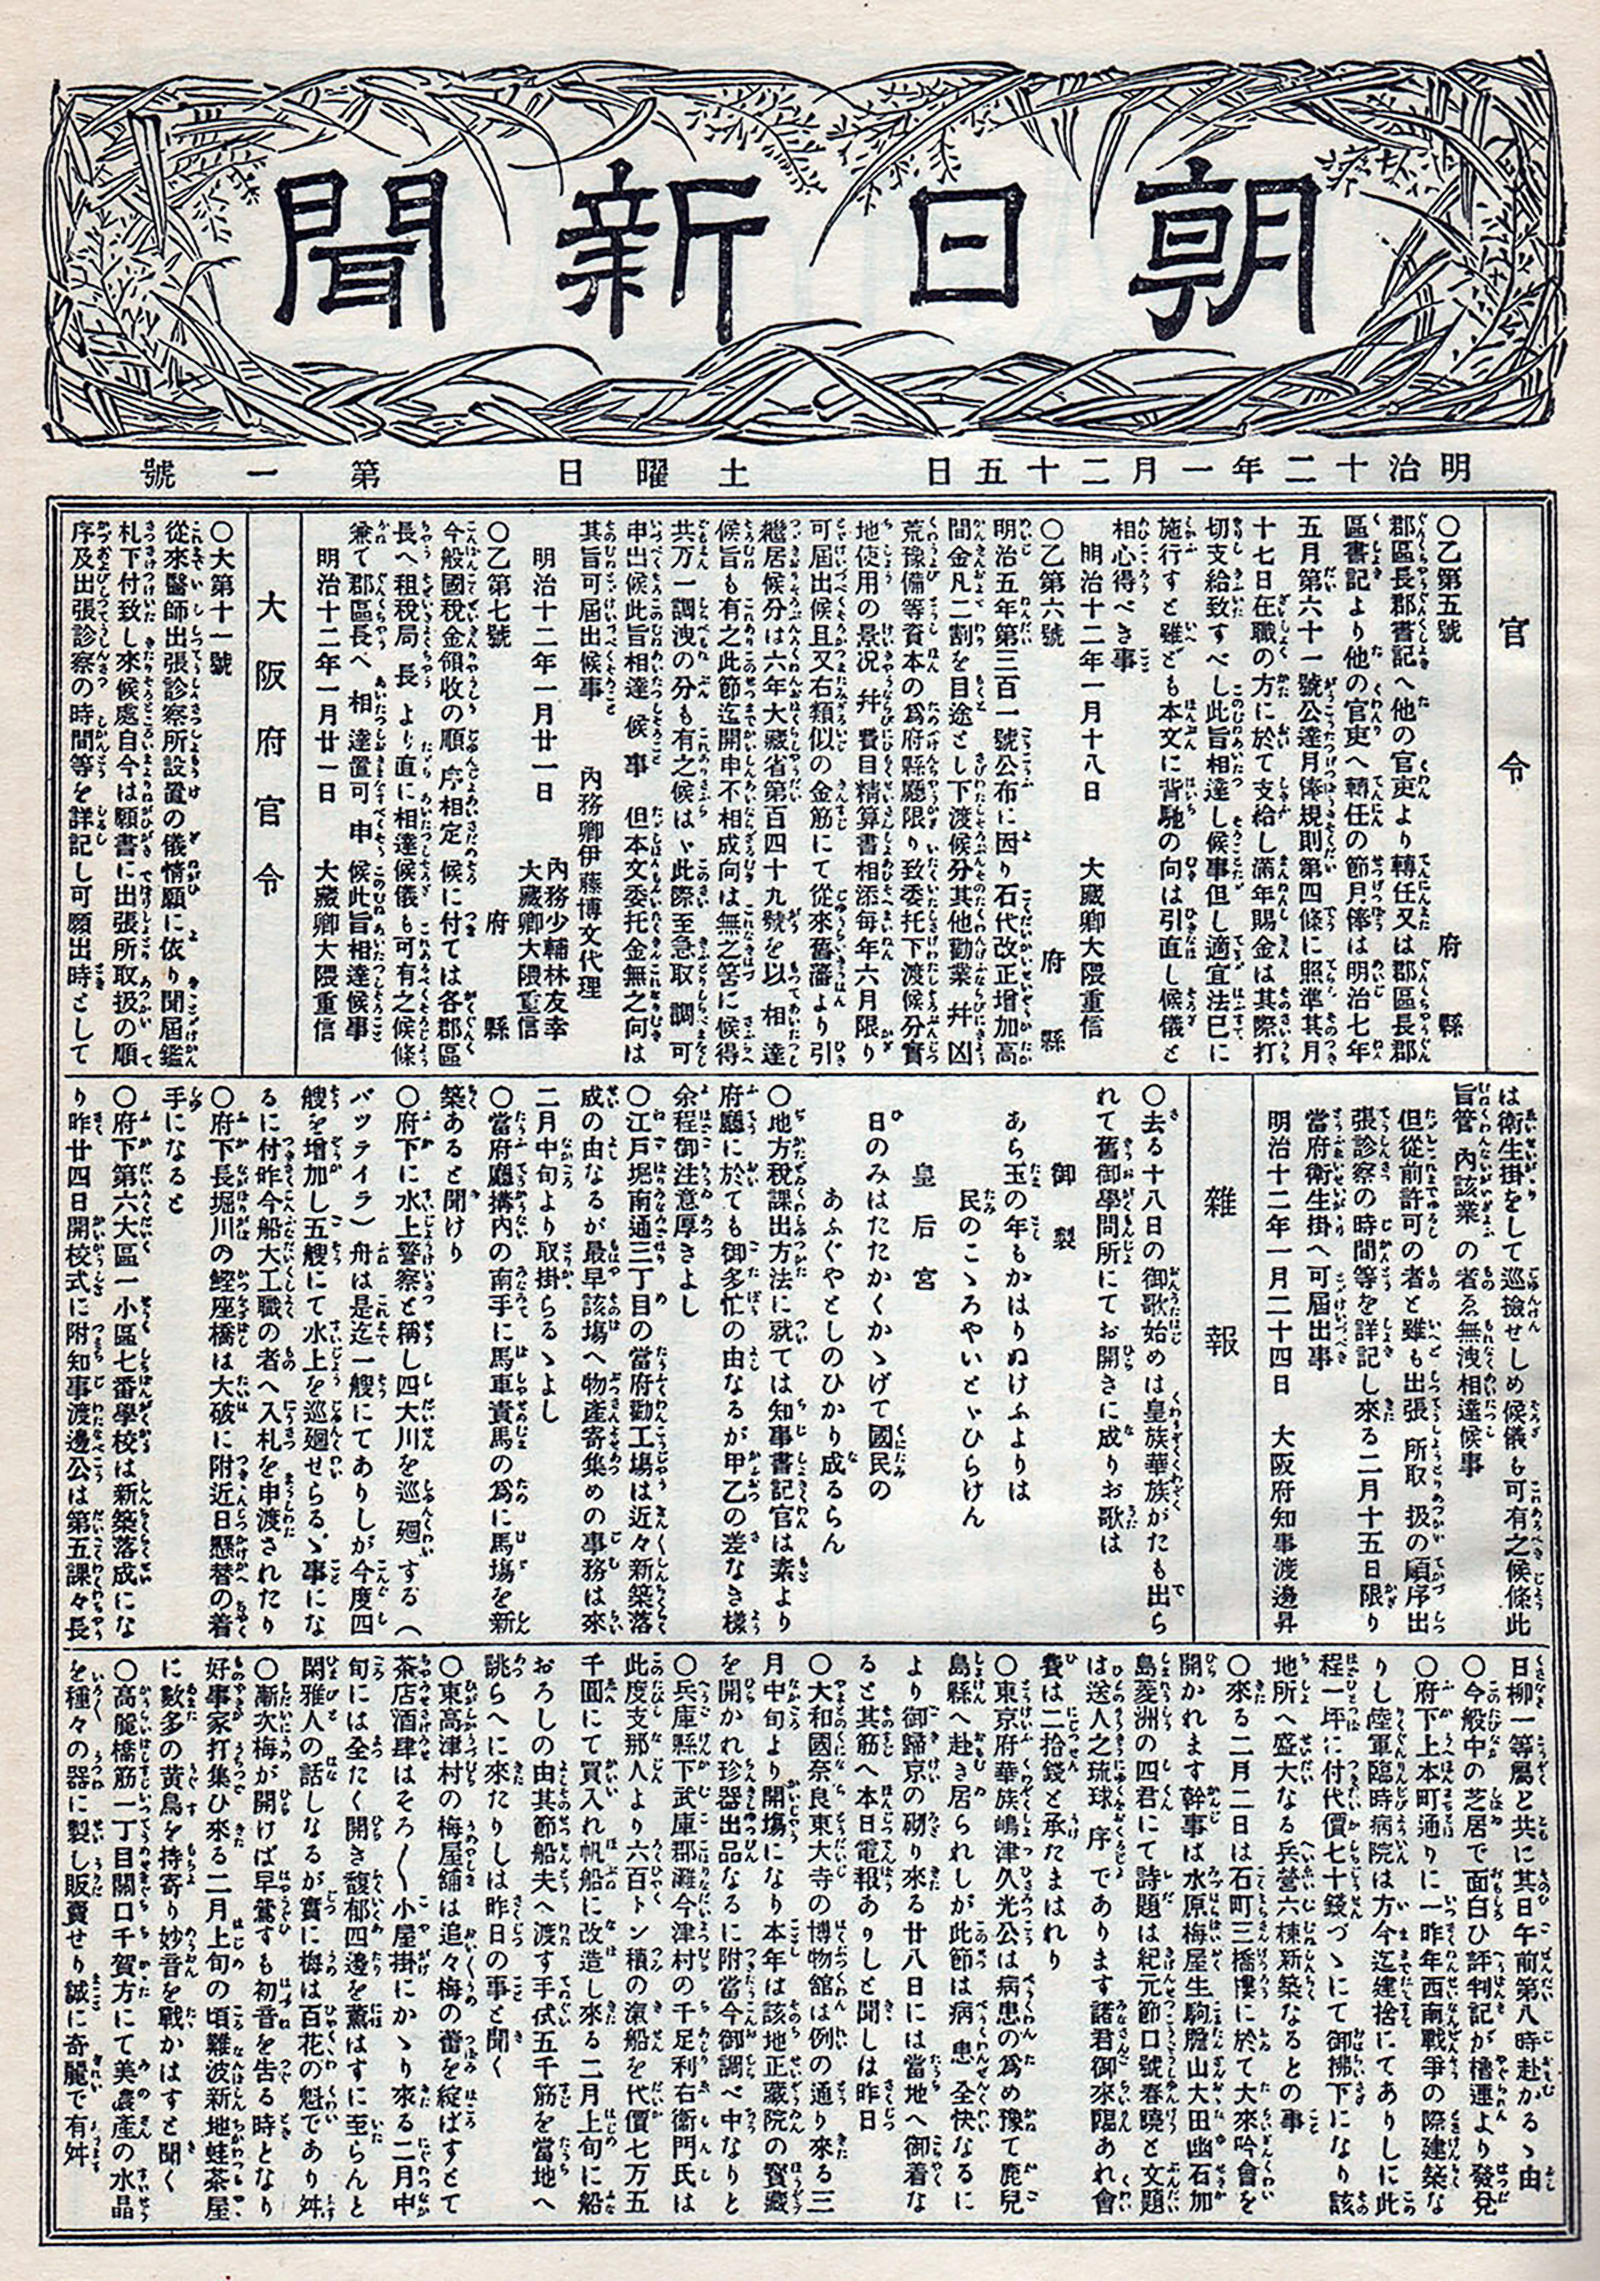 Asahi-Shimbun-First-Issue-Front-Page-January 25-1879.png